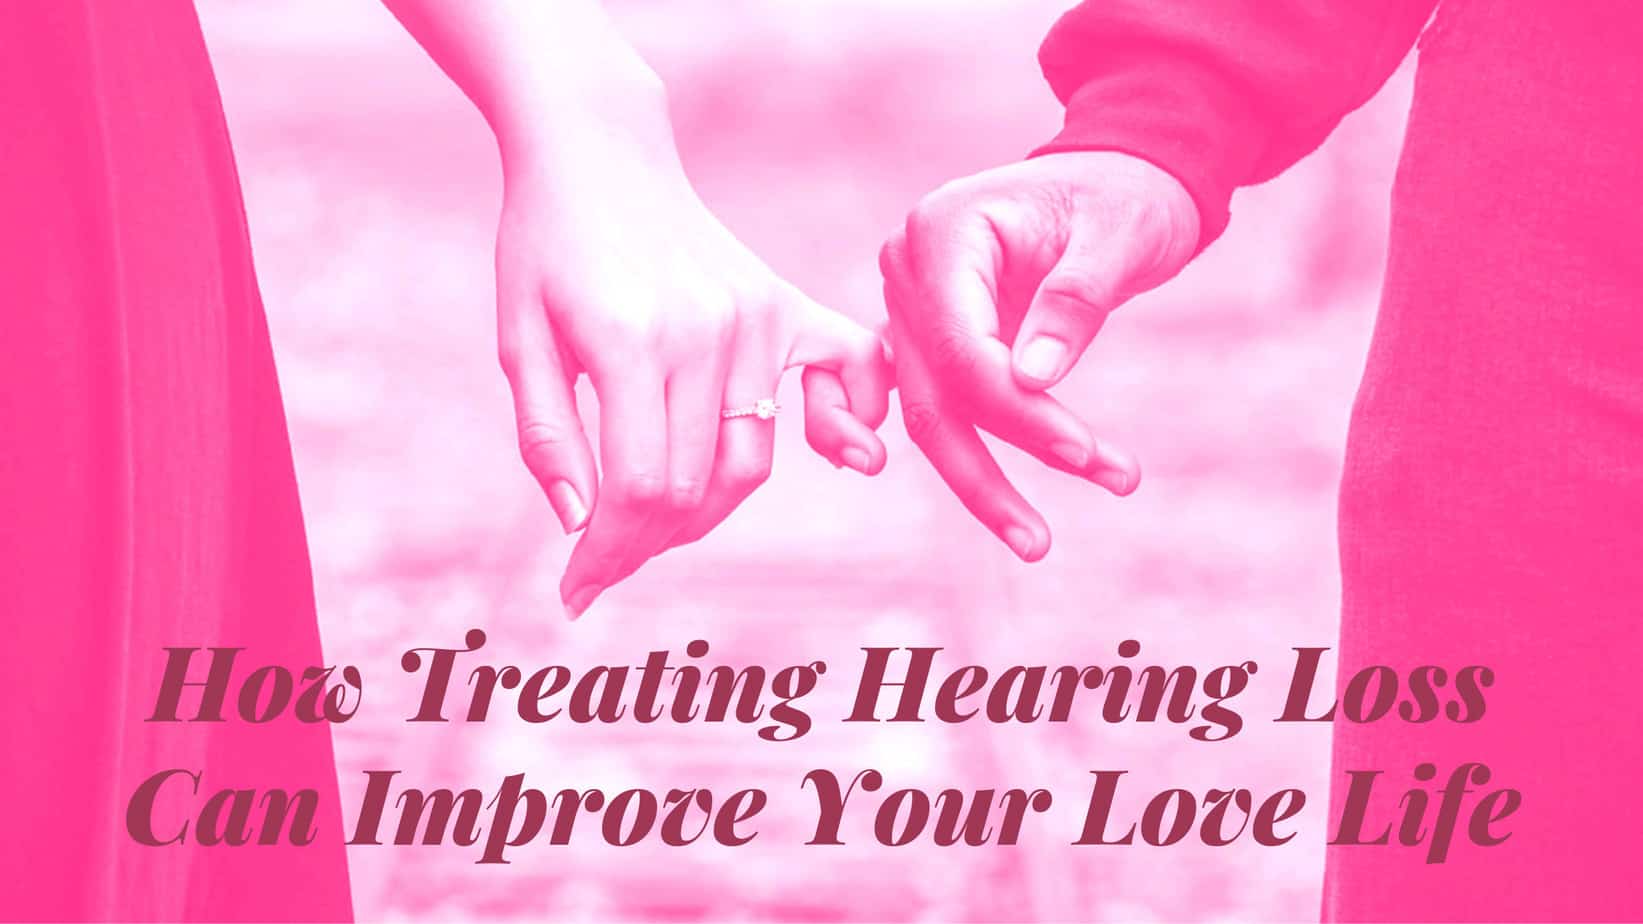 How Treating Hearing Loss Can Improve Your Love Life